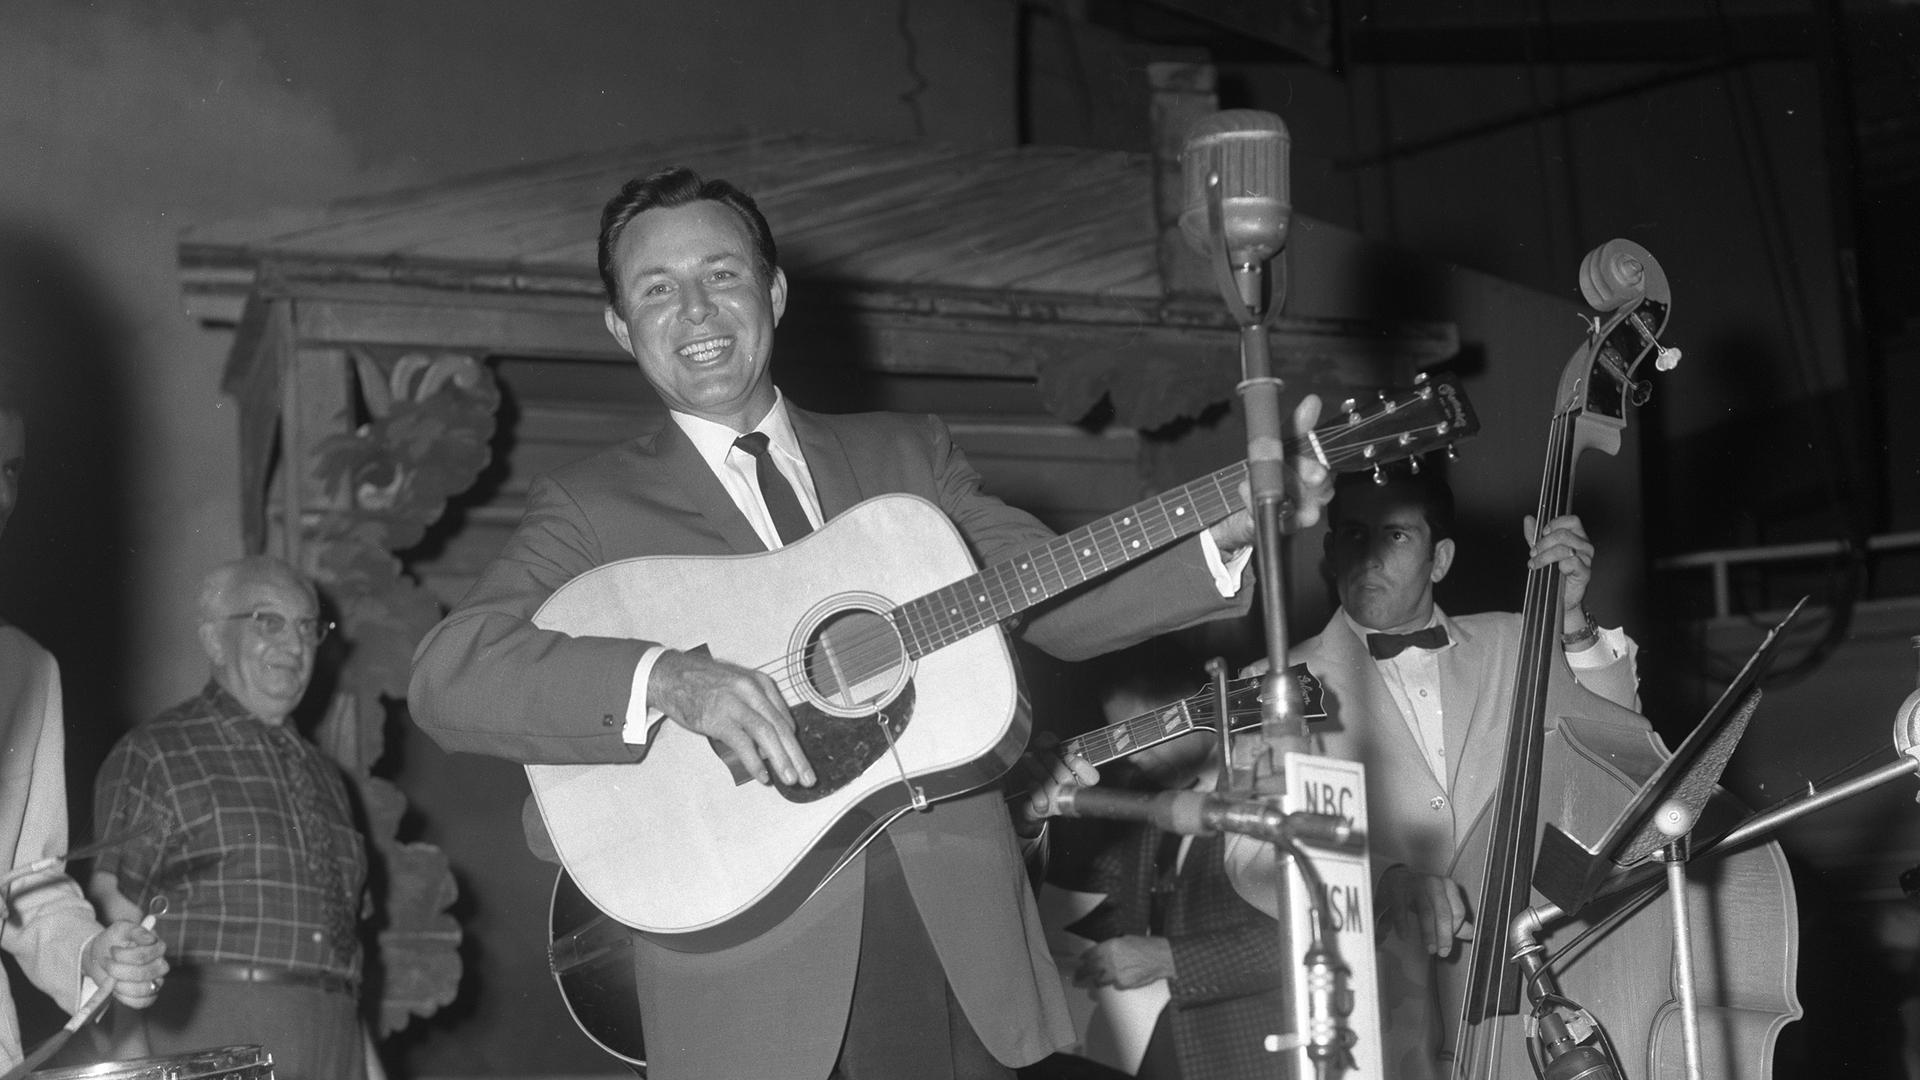 Jim Reeves on the Grand Ole Opry, September 3, 1960.